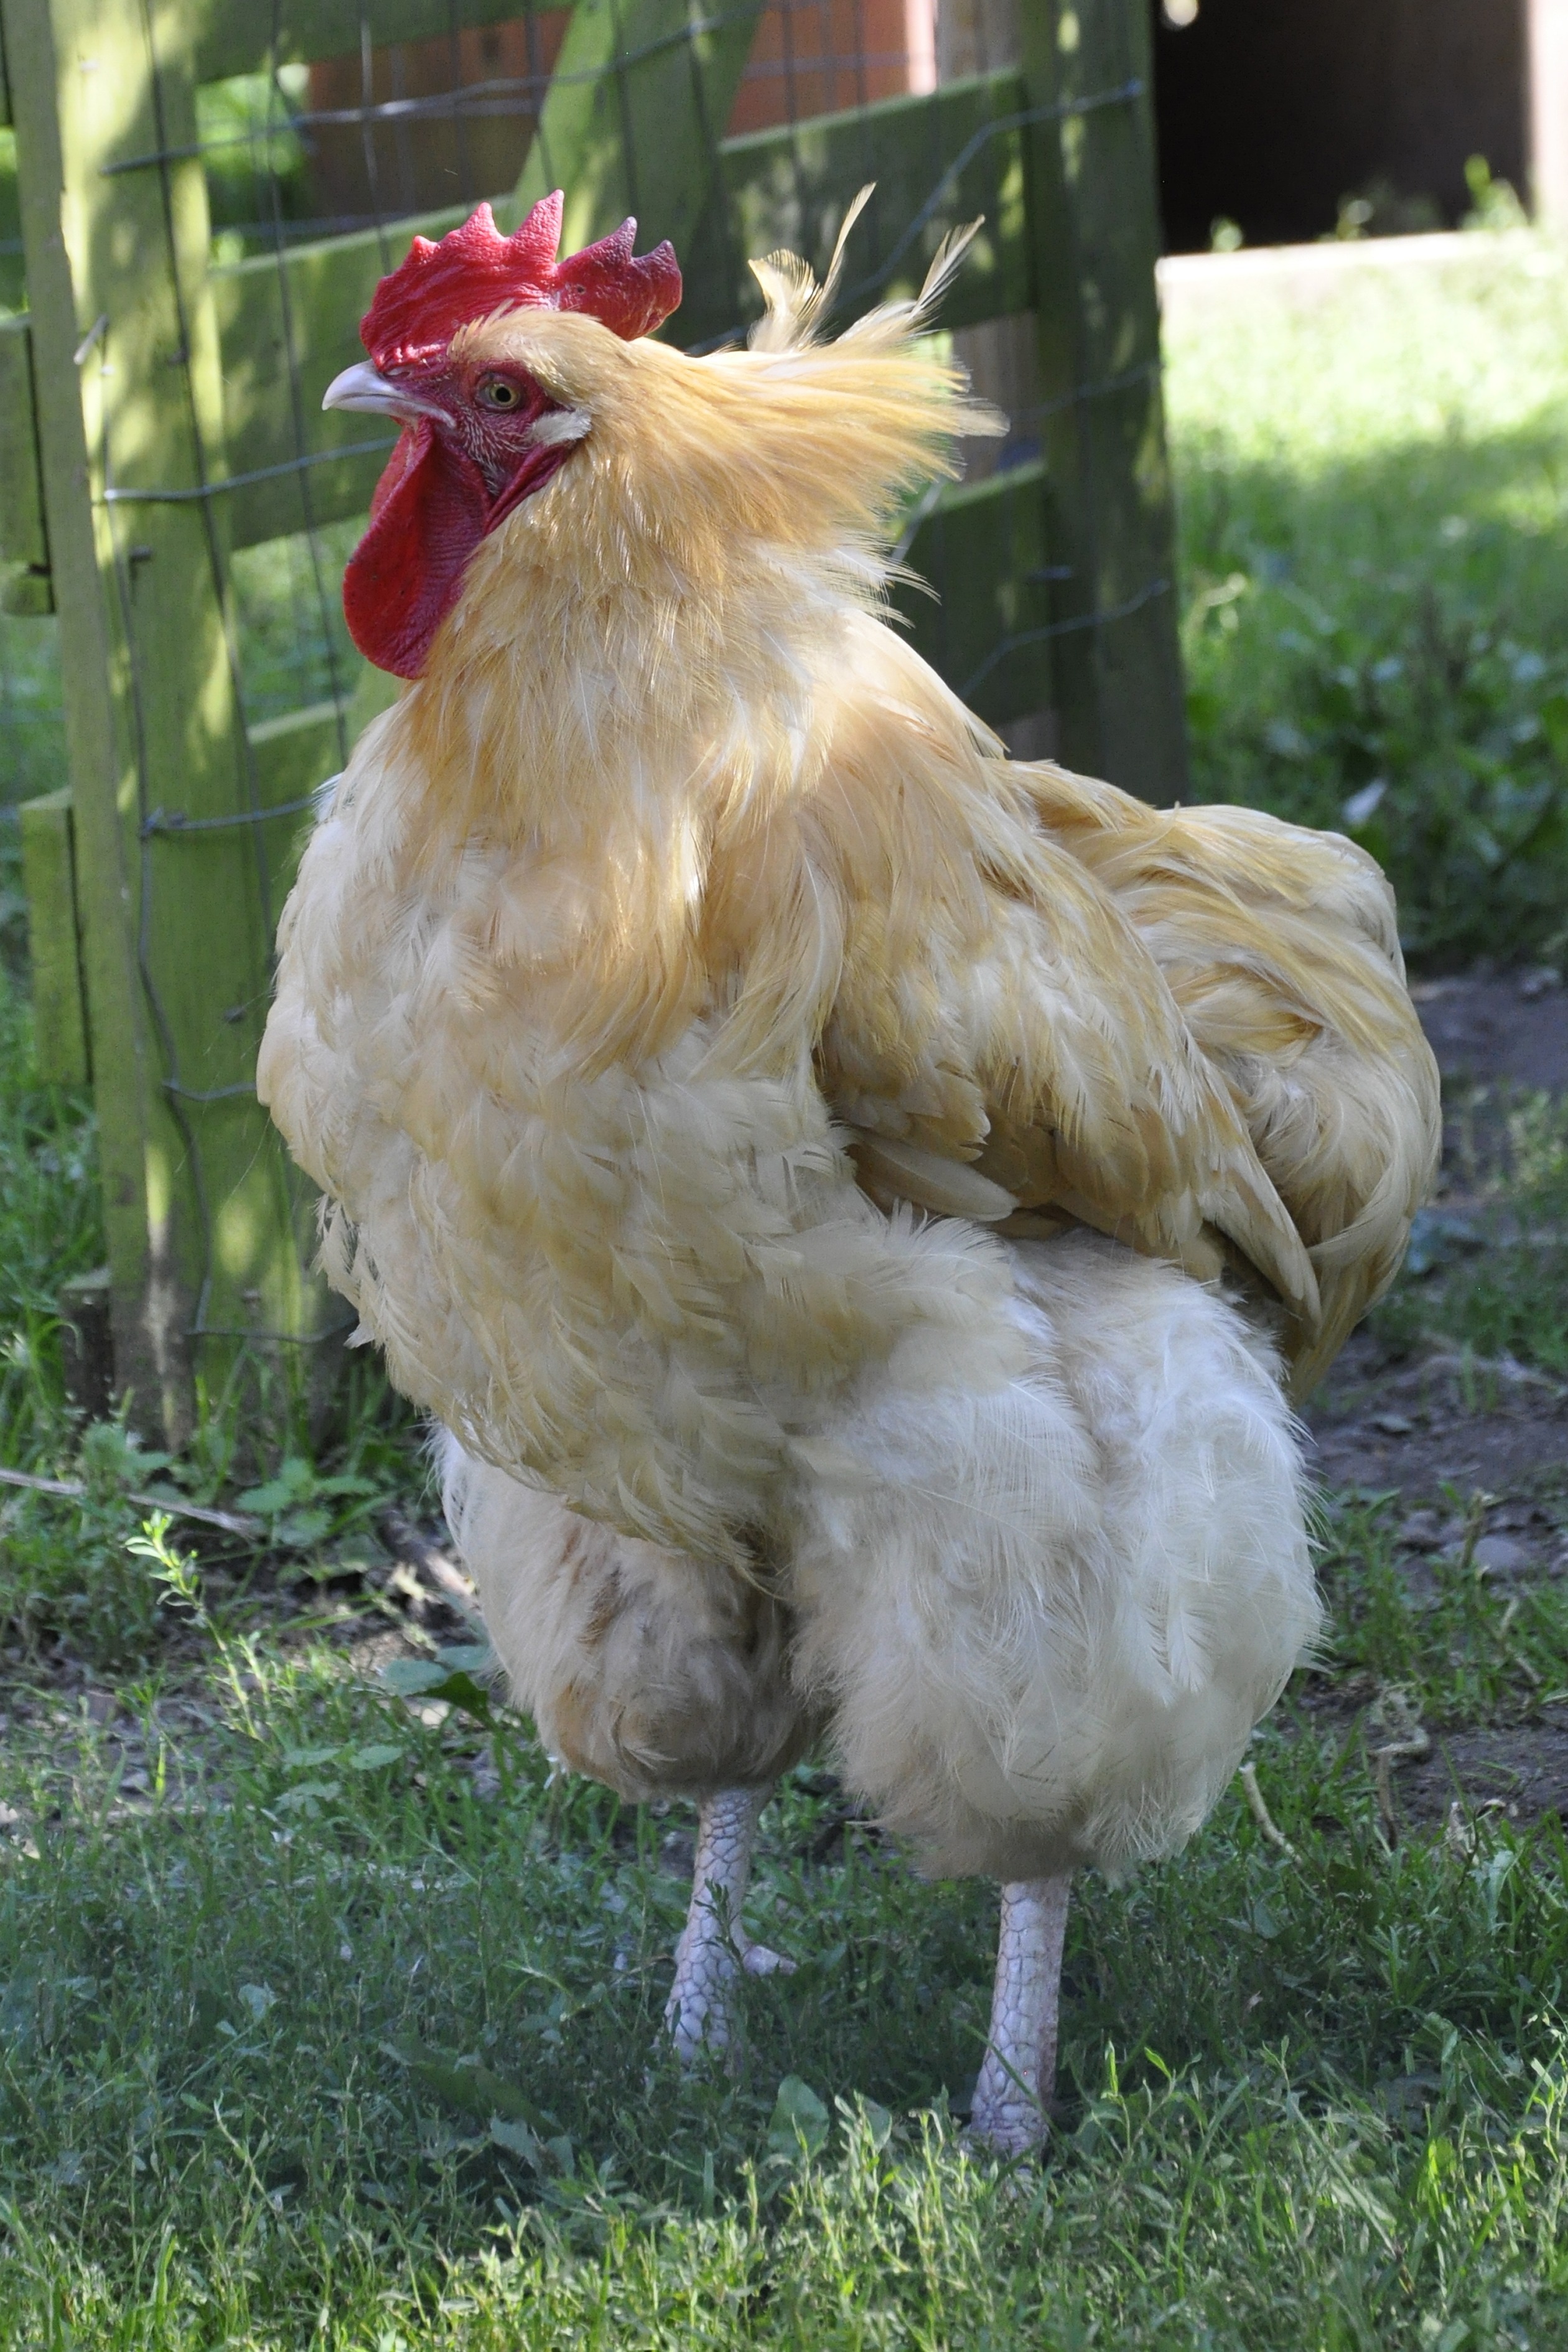 white and yellow rooster standing on green grass during daytime